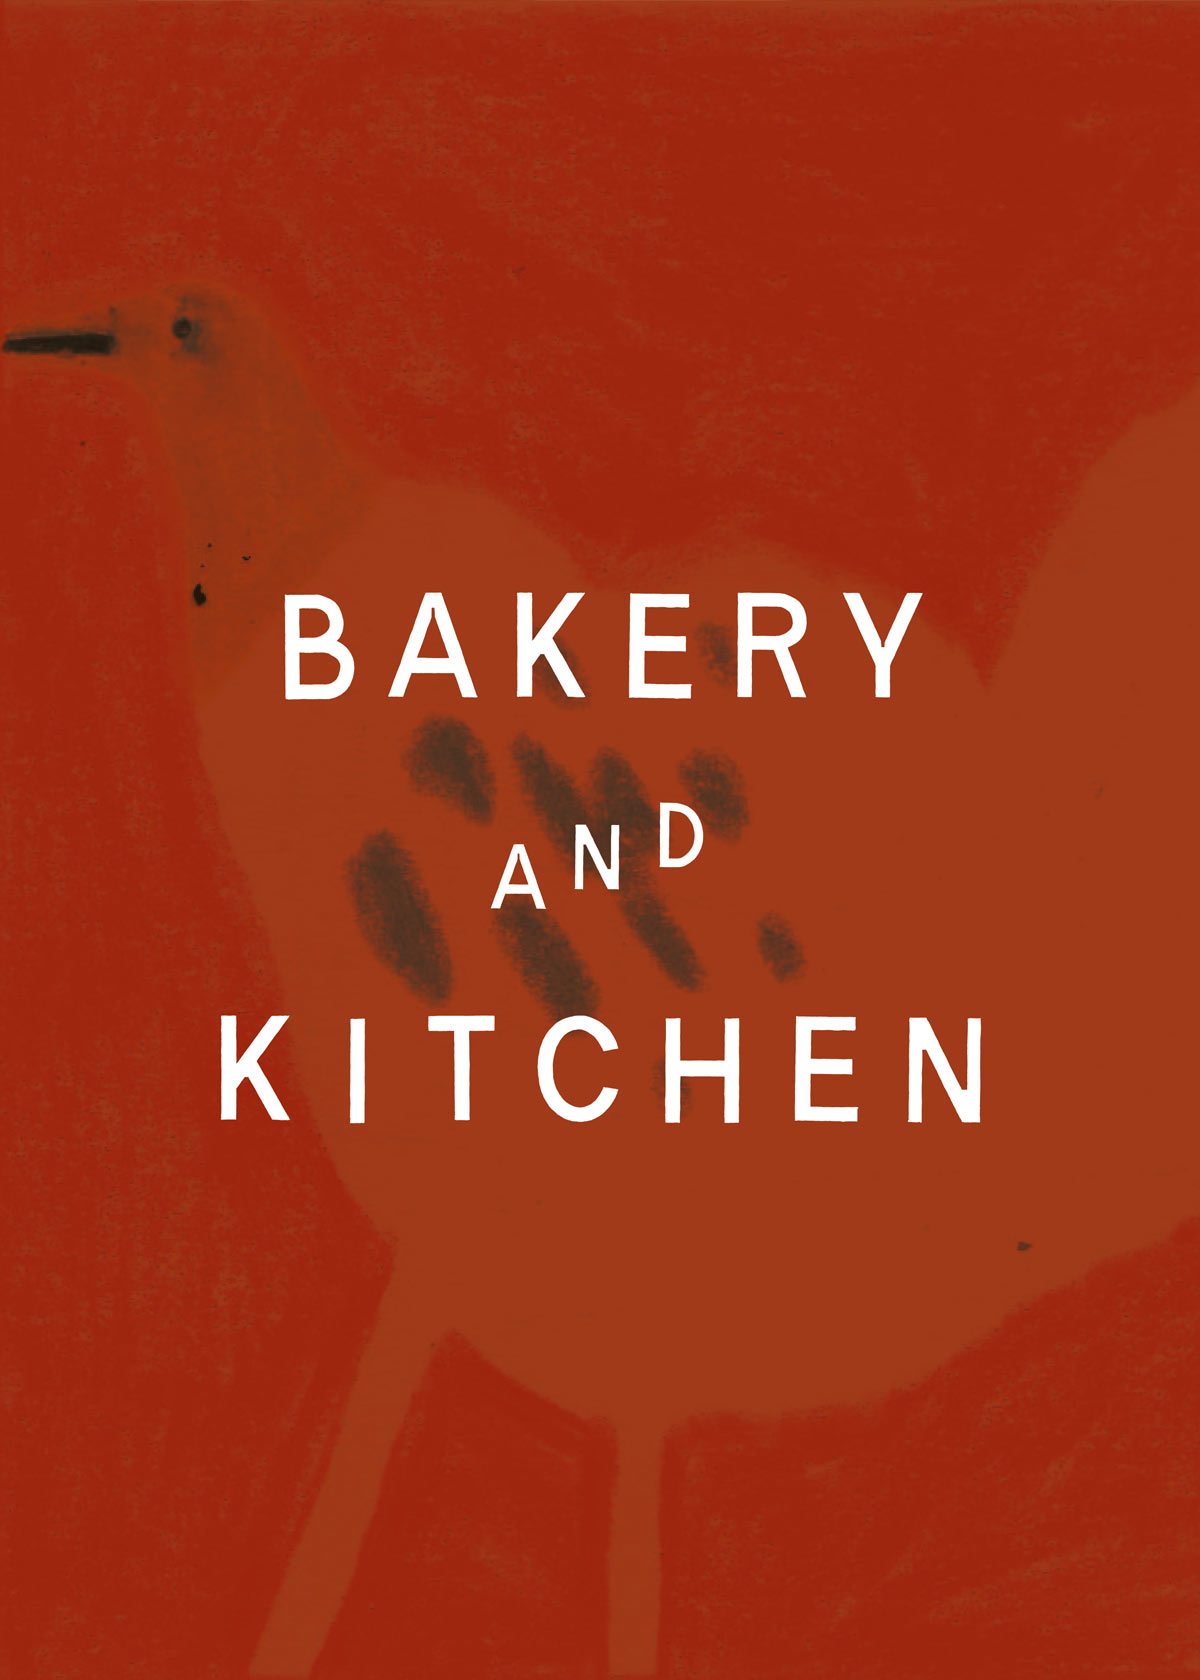 Bakery and kitchen